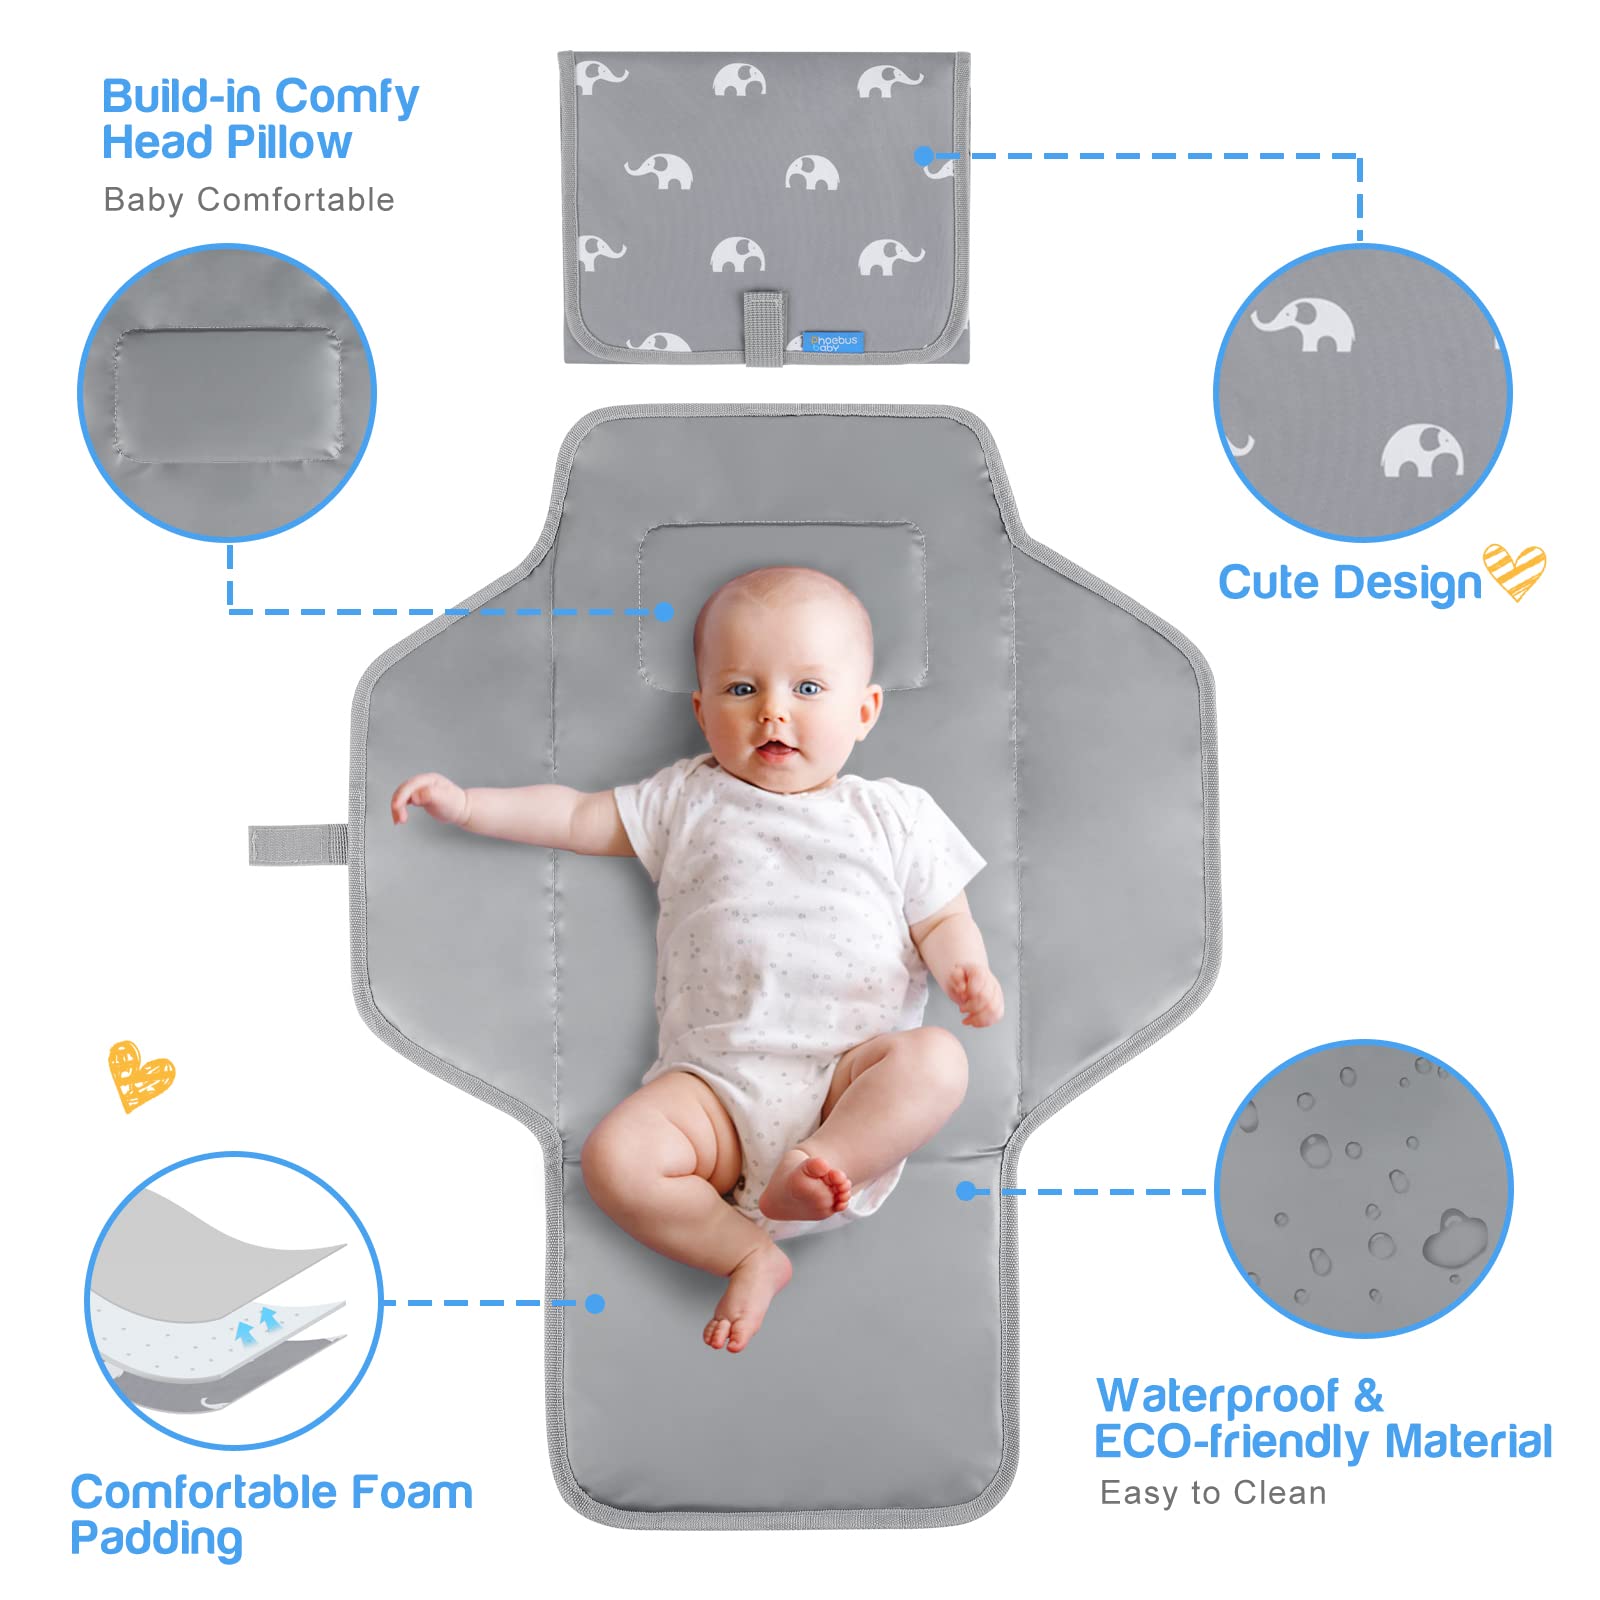 PHOEBUS BABY Portable Changing Pad Travel - Waterproof Compact Diaper Changing Mat with Built-in Pillow - Lightweight & Foldable Changing Station, Newborn Shower Gifts(Cute Elephant)